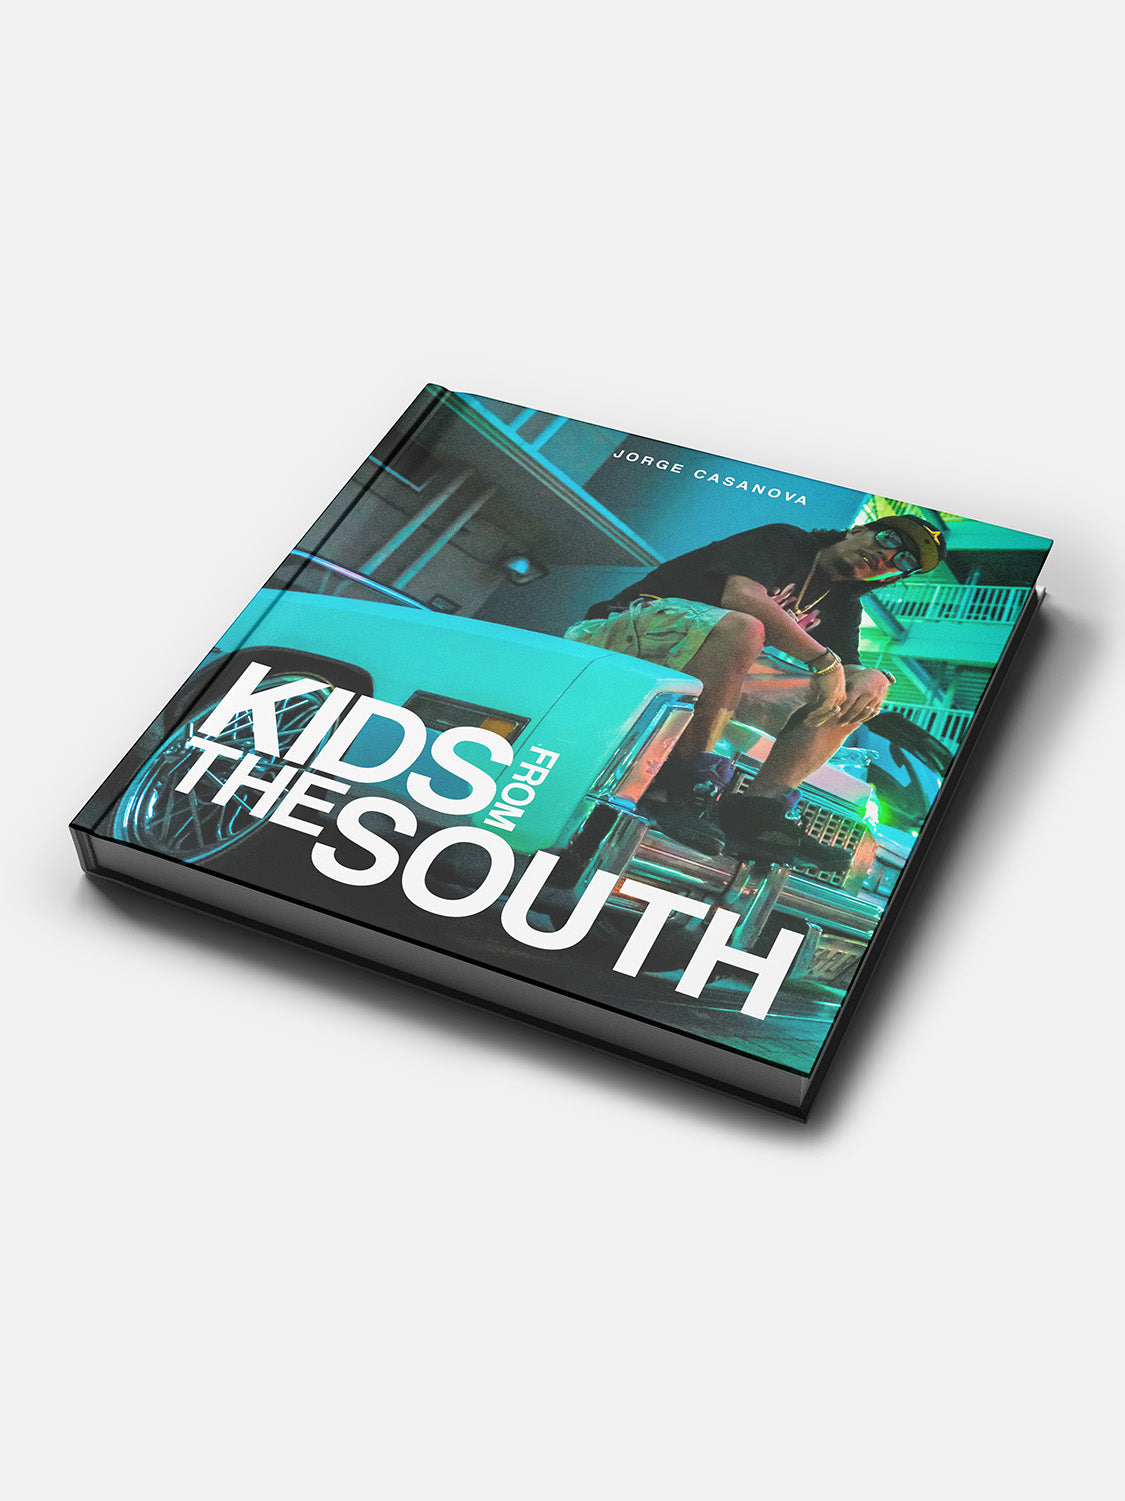 KIDS FROM THE SOUTH - PHOTO BOOK